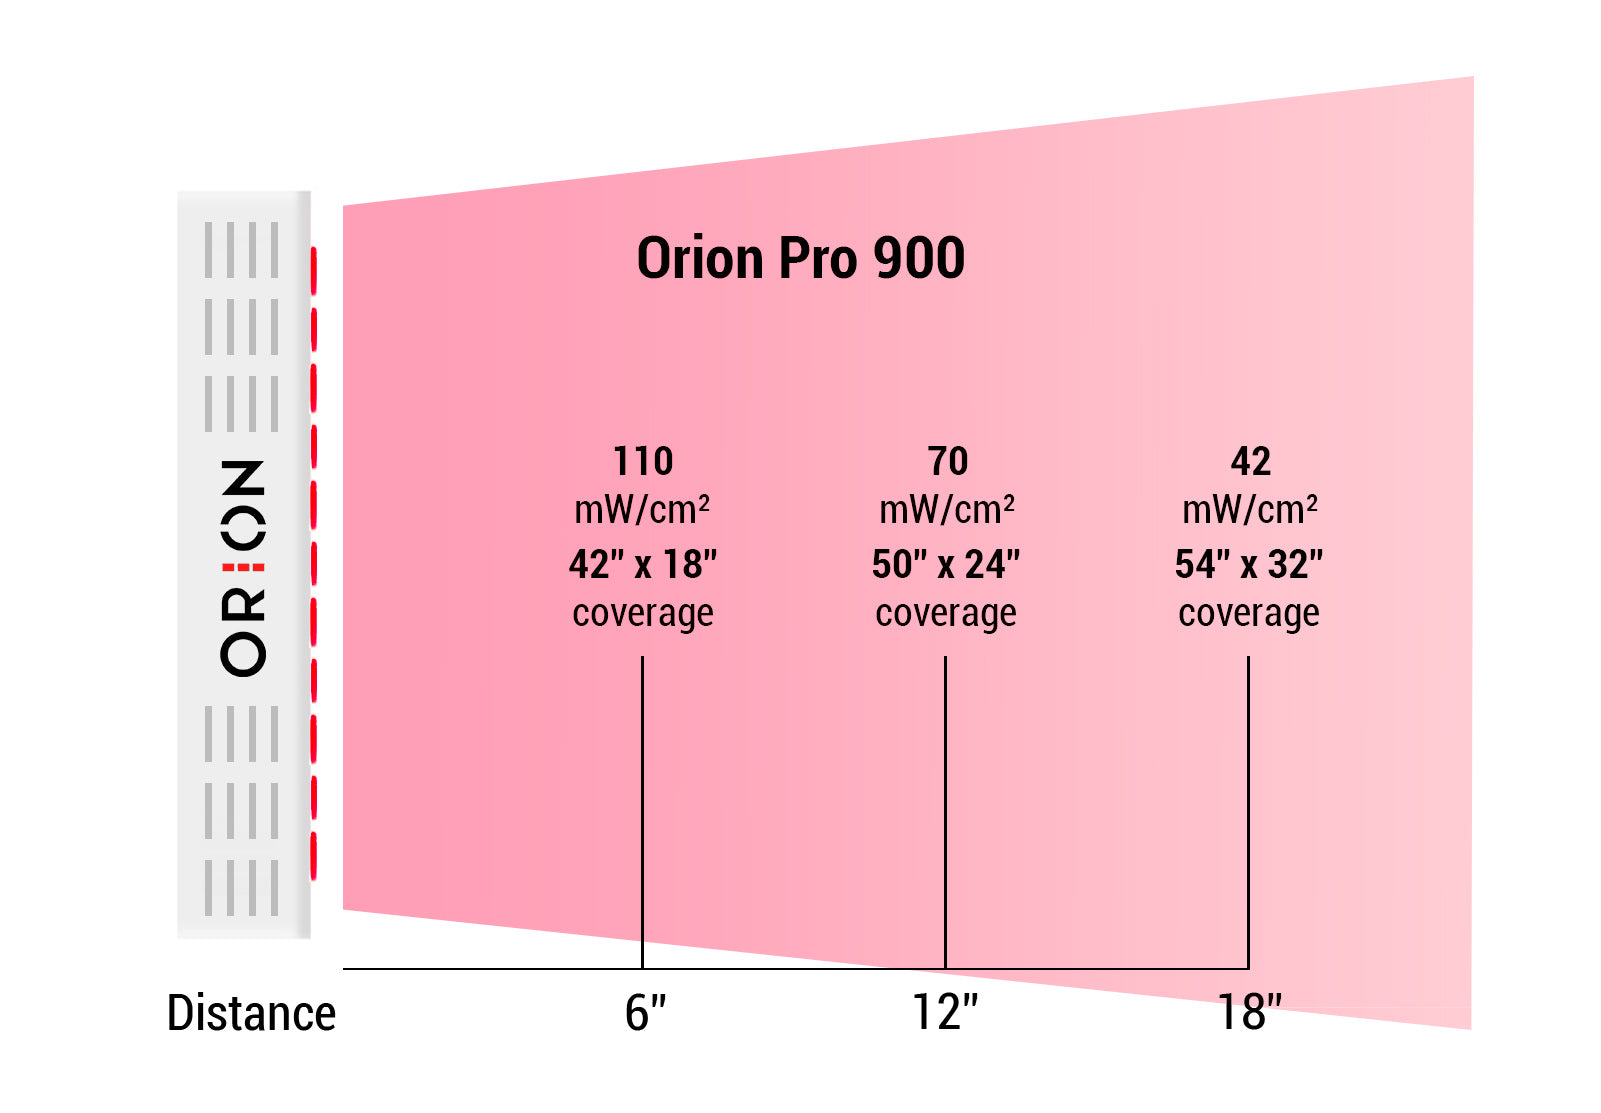 Irradiance levels of Orion Red Light Therapy at 3, 6, 12, and 18 inches. Orion Pro 900.